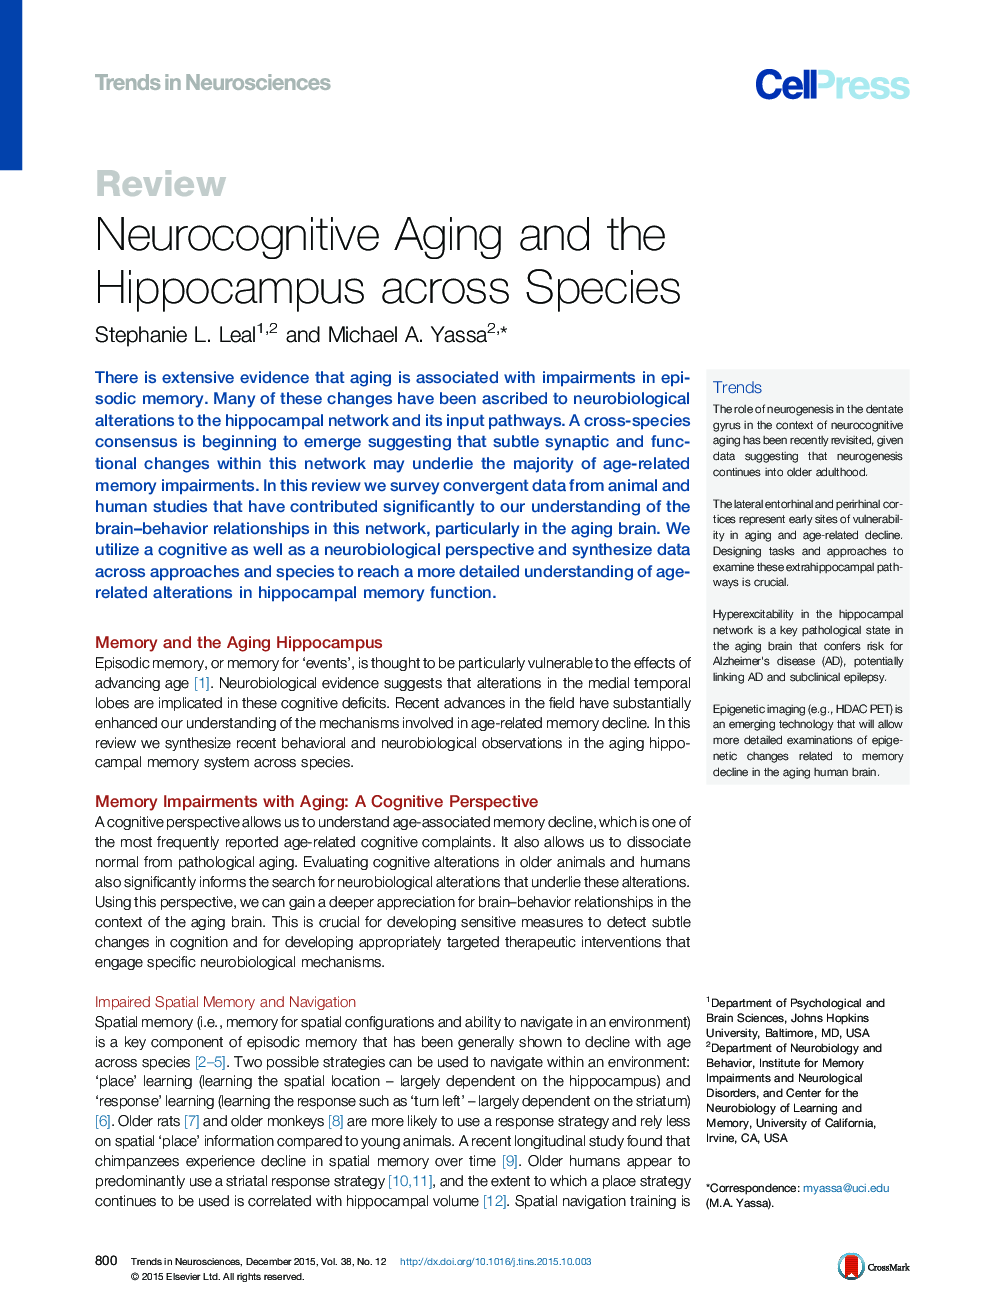 Neurocognitive Aging and the Hippocampus across Species